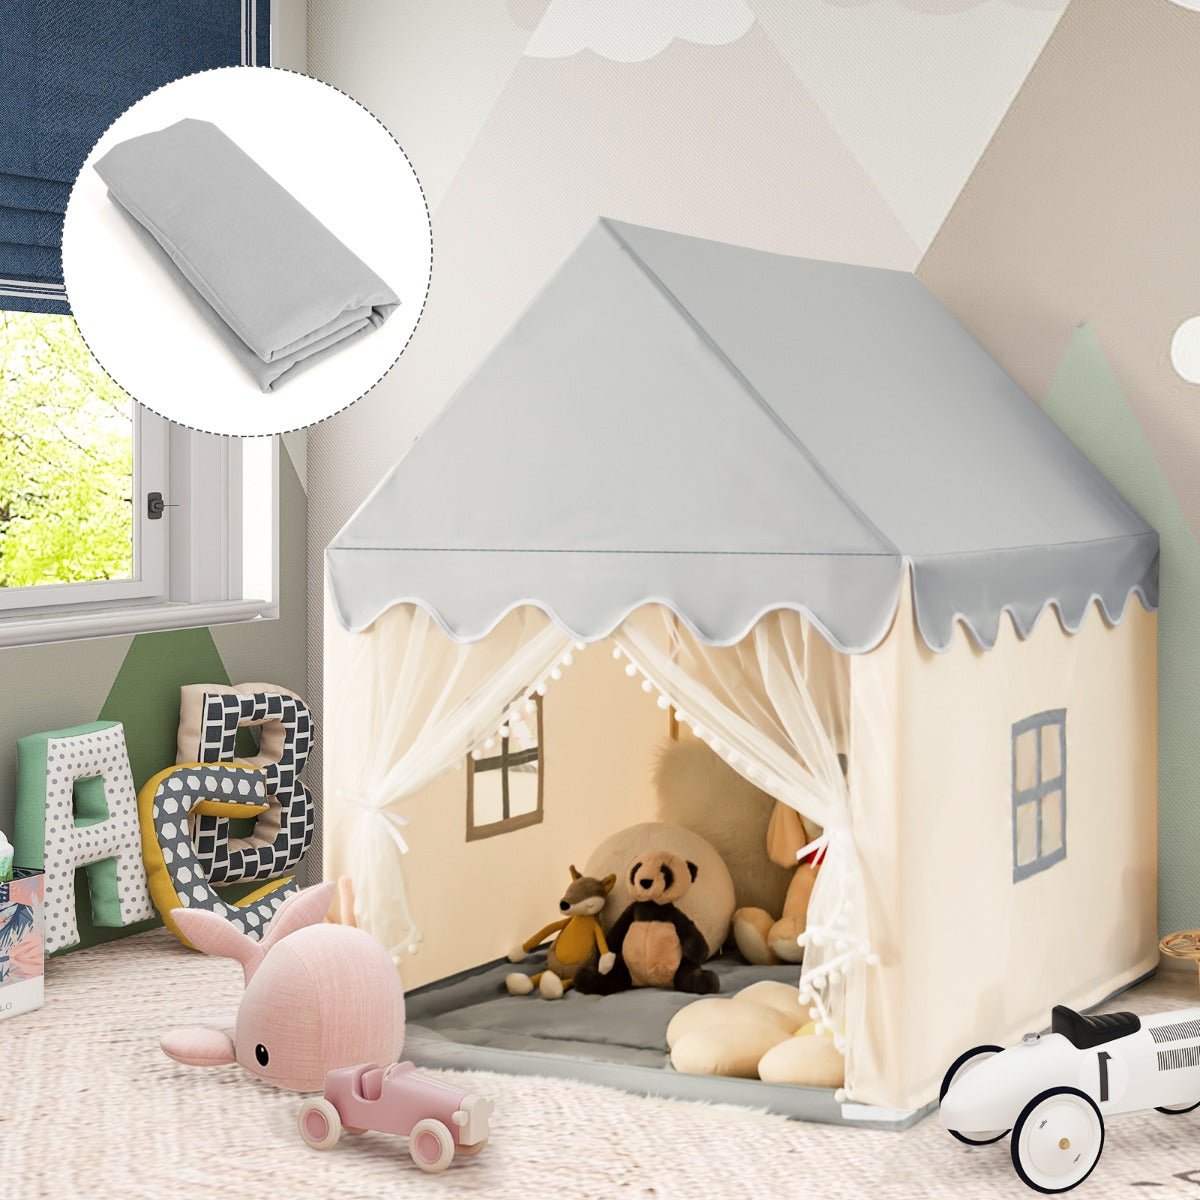 Create Memorable Moments with a Soft Mat Playhouse